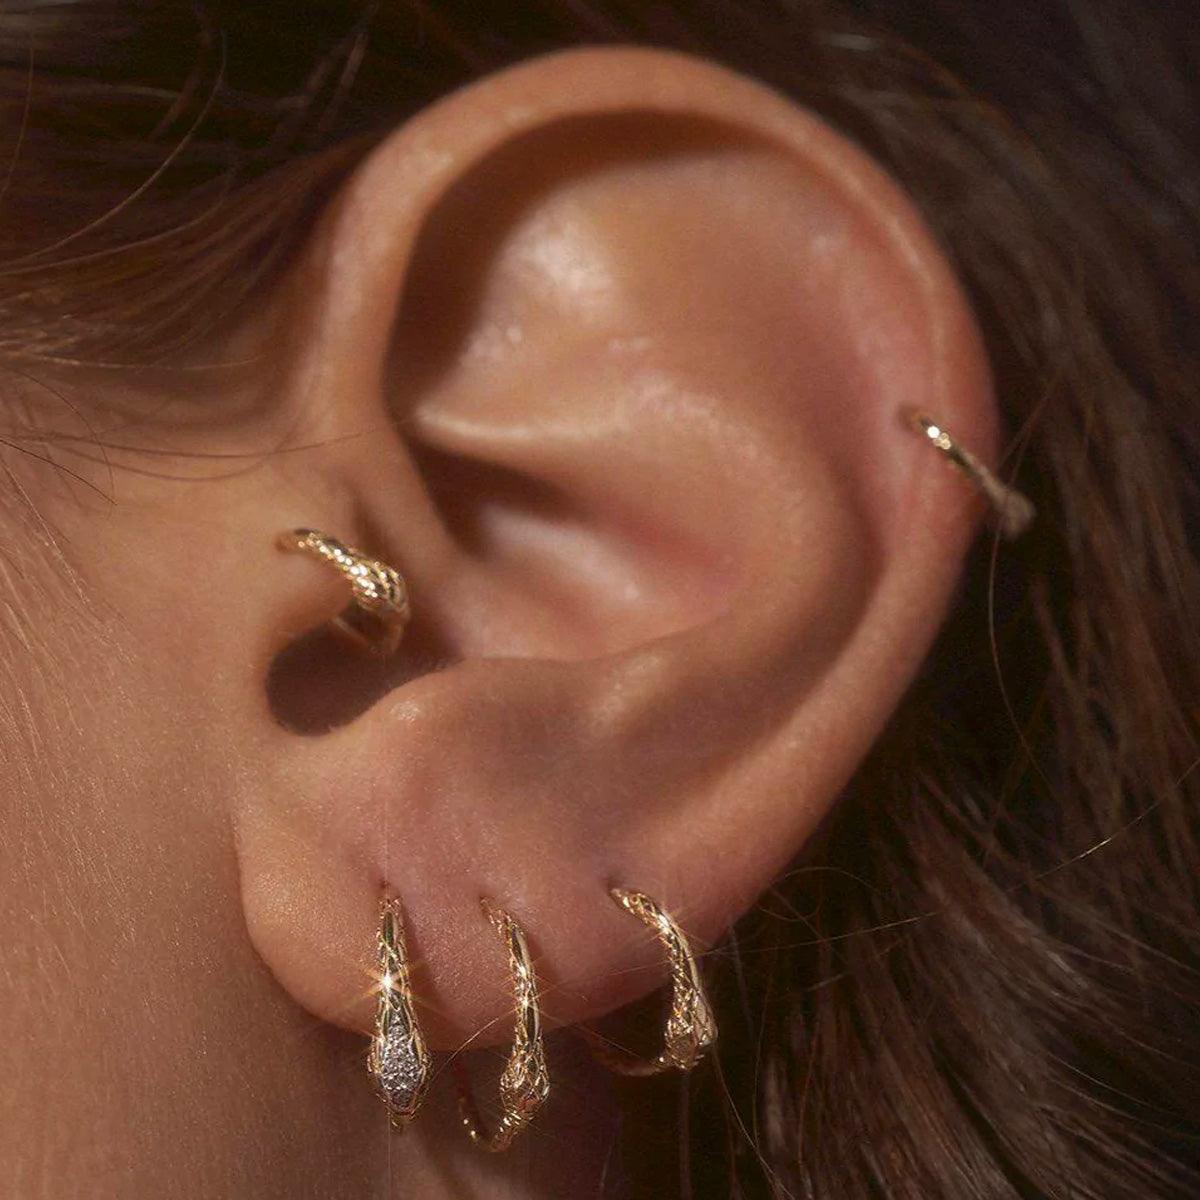 Conch Piercing: Everything You Need to Know - At Present